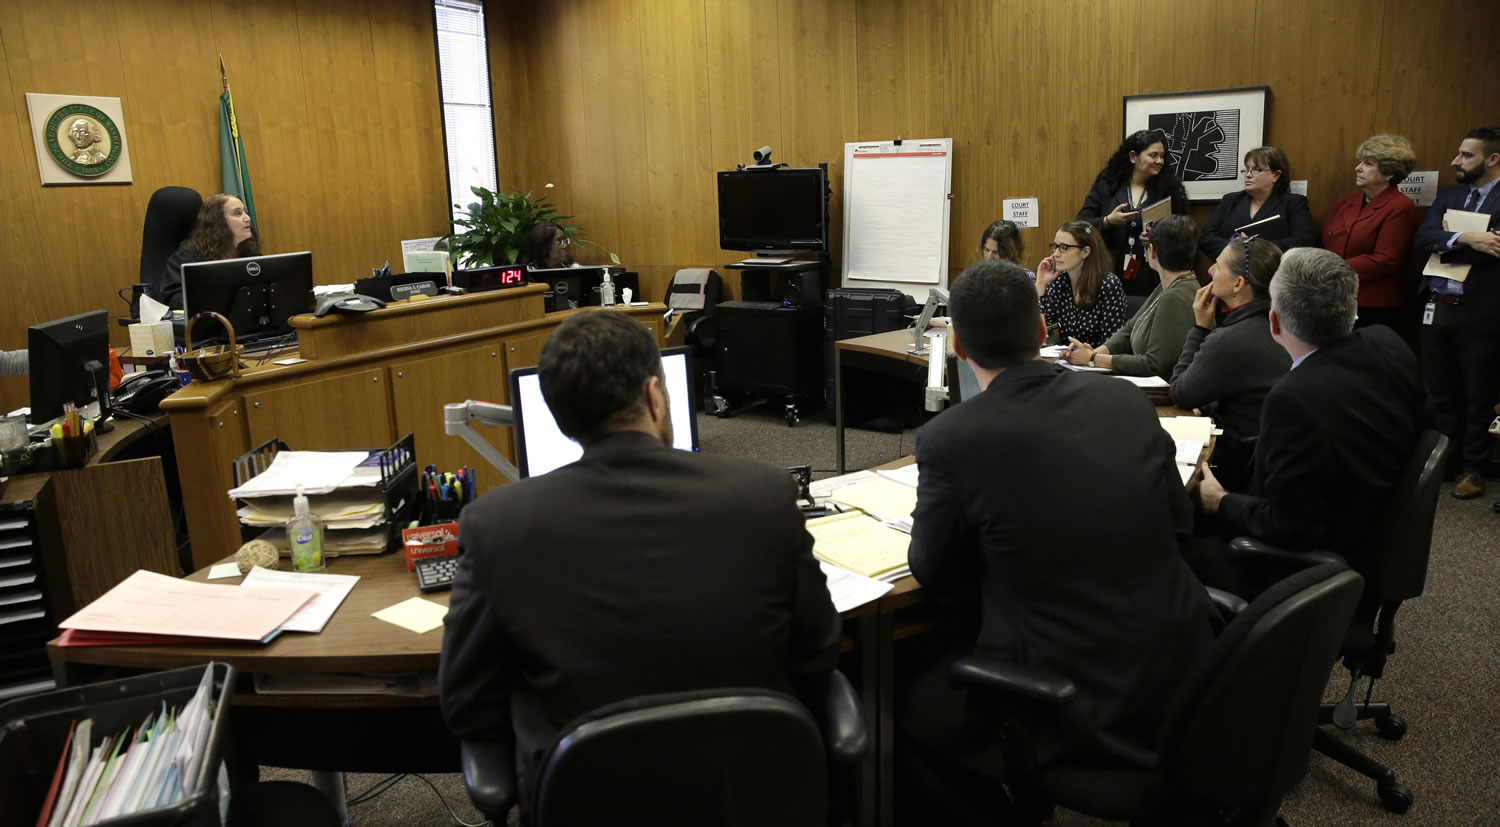 Judge Regina Cahan, left, presides over a packed juvenile courtroom in Seattle on Tuesday before the appearance of one of three teens who were arrested Monday and are suspected in a drug-related shooting that left two people dead and three wounded at a well-known Seattle homeless camp. (AP Photo/Ted S.